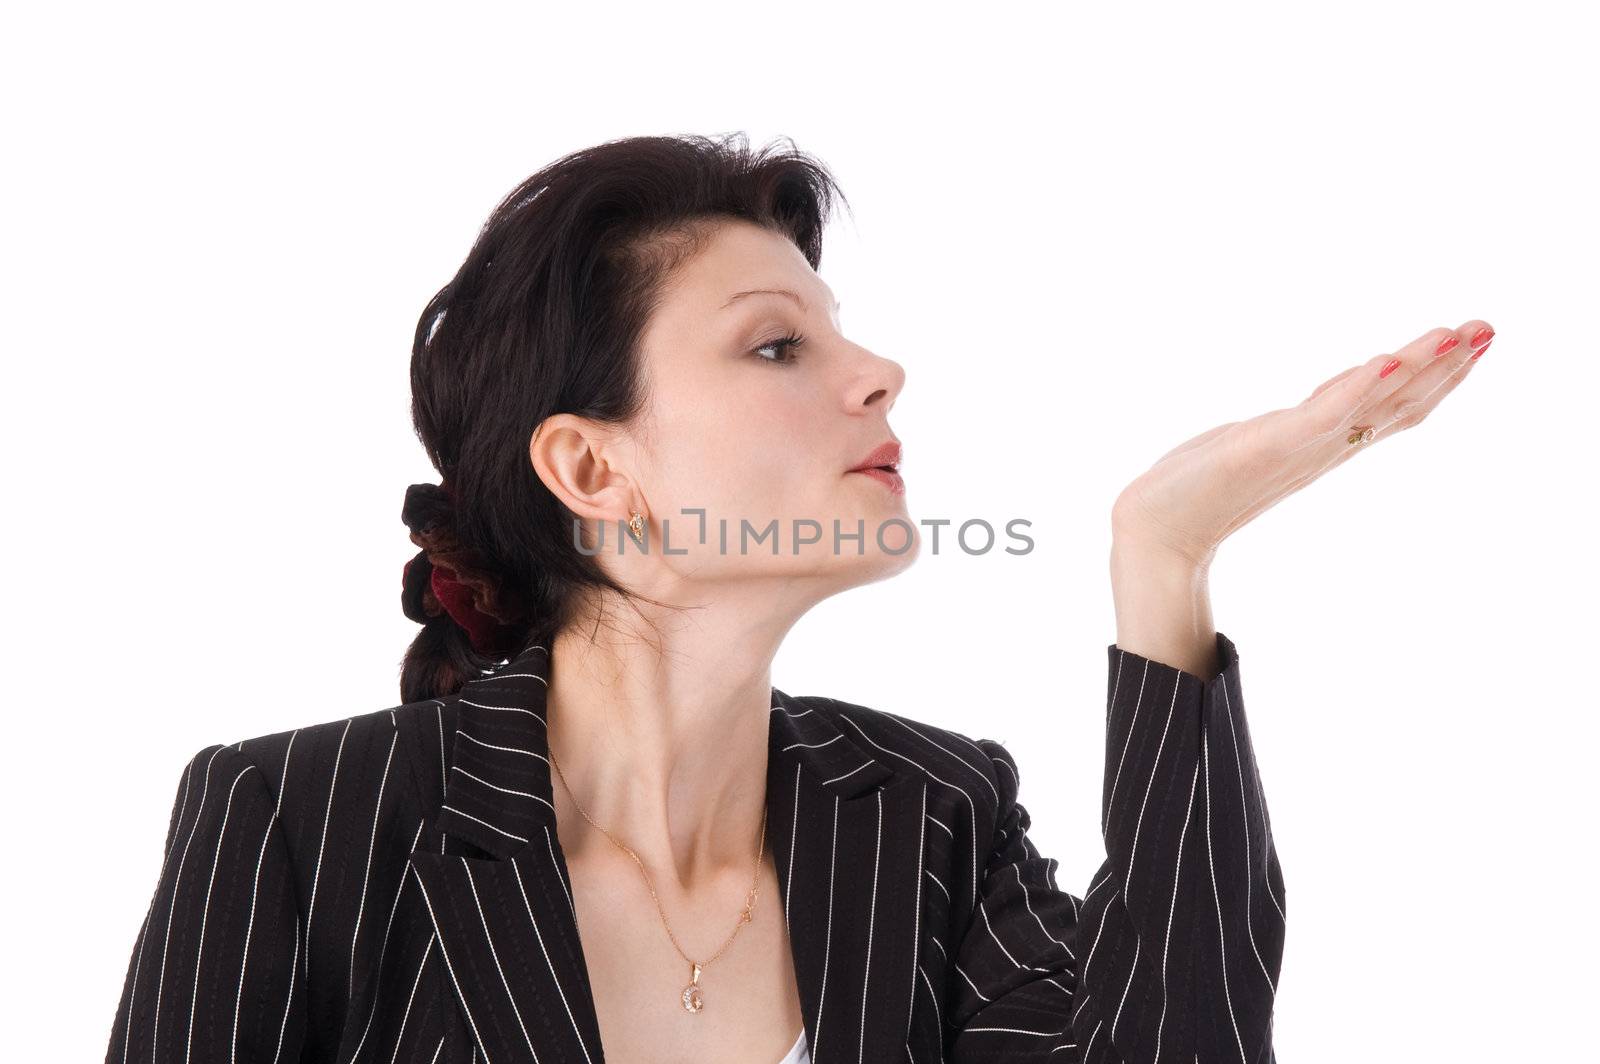 The girl in a business suit blows on a palm